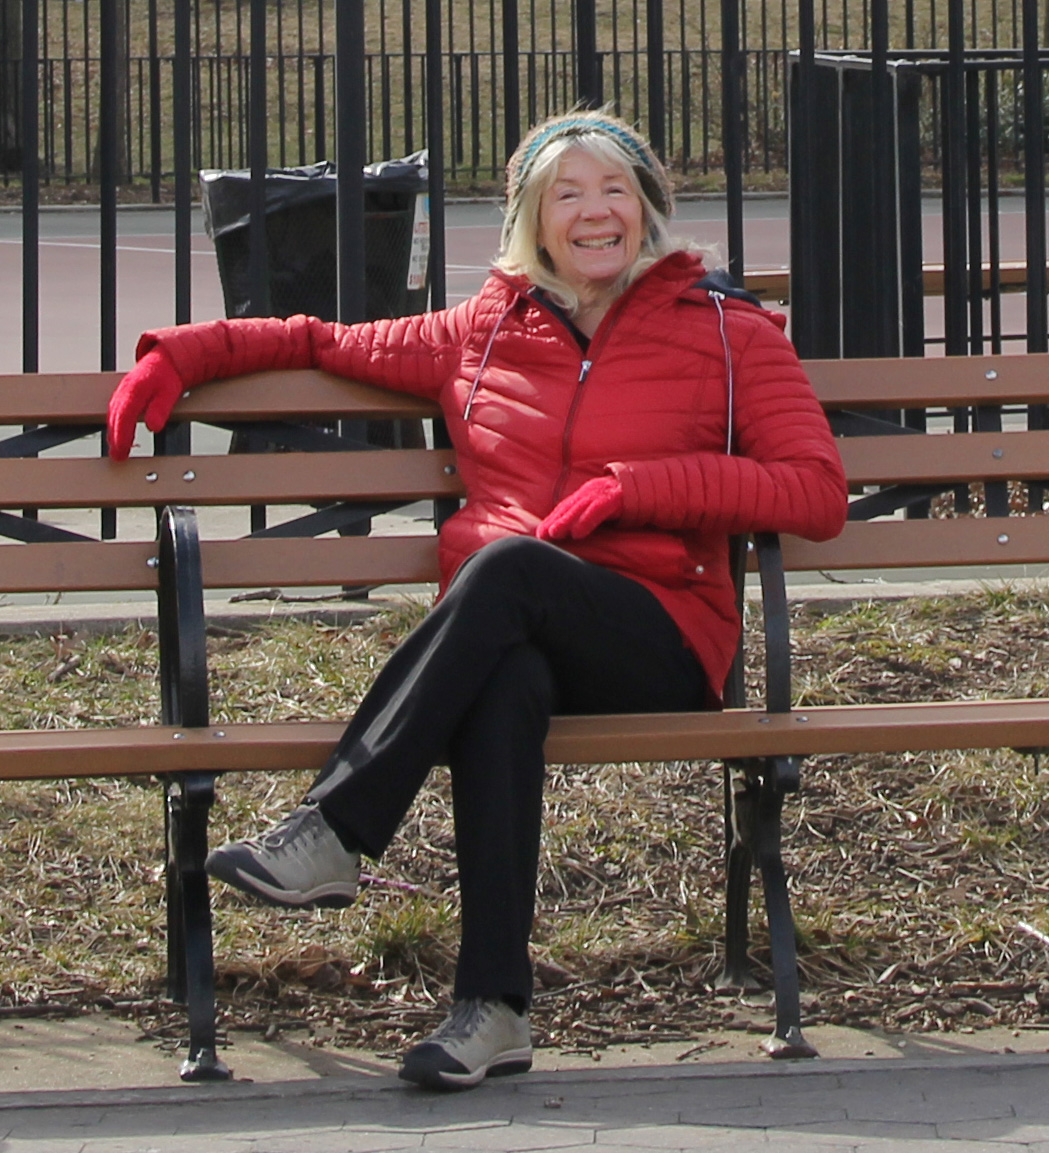 Pam in Oval Park March 2019